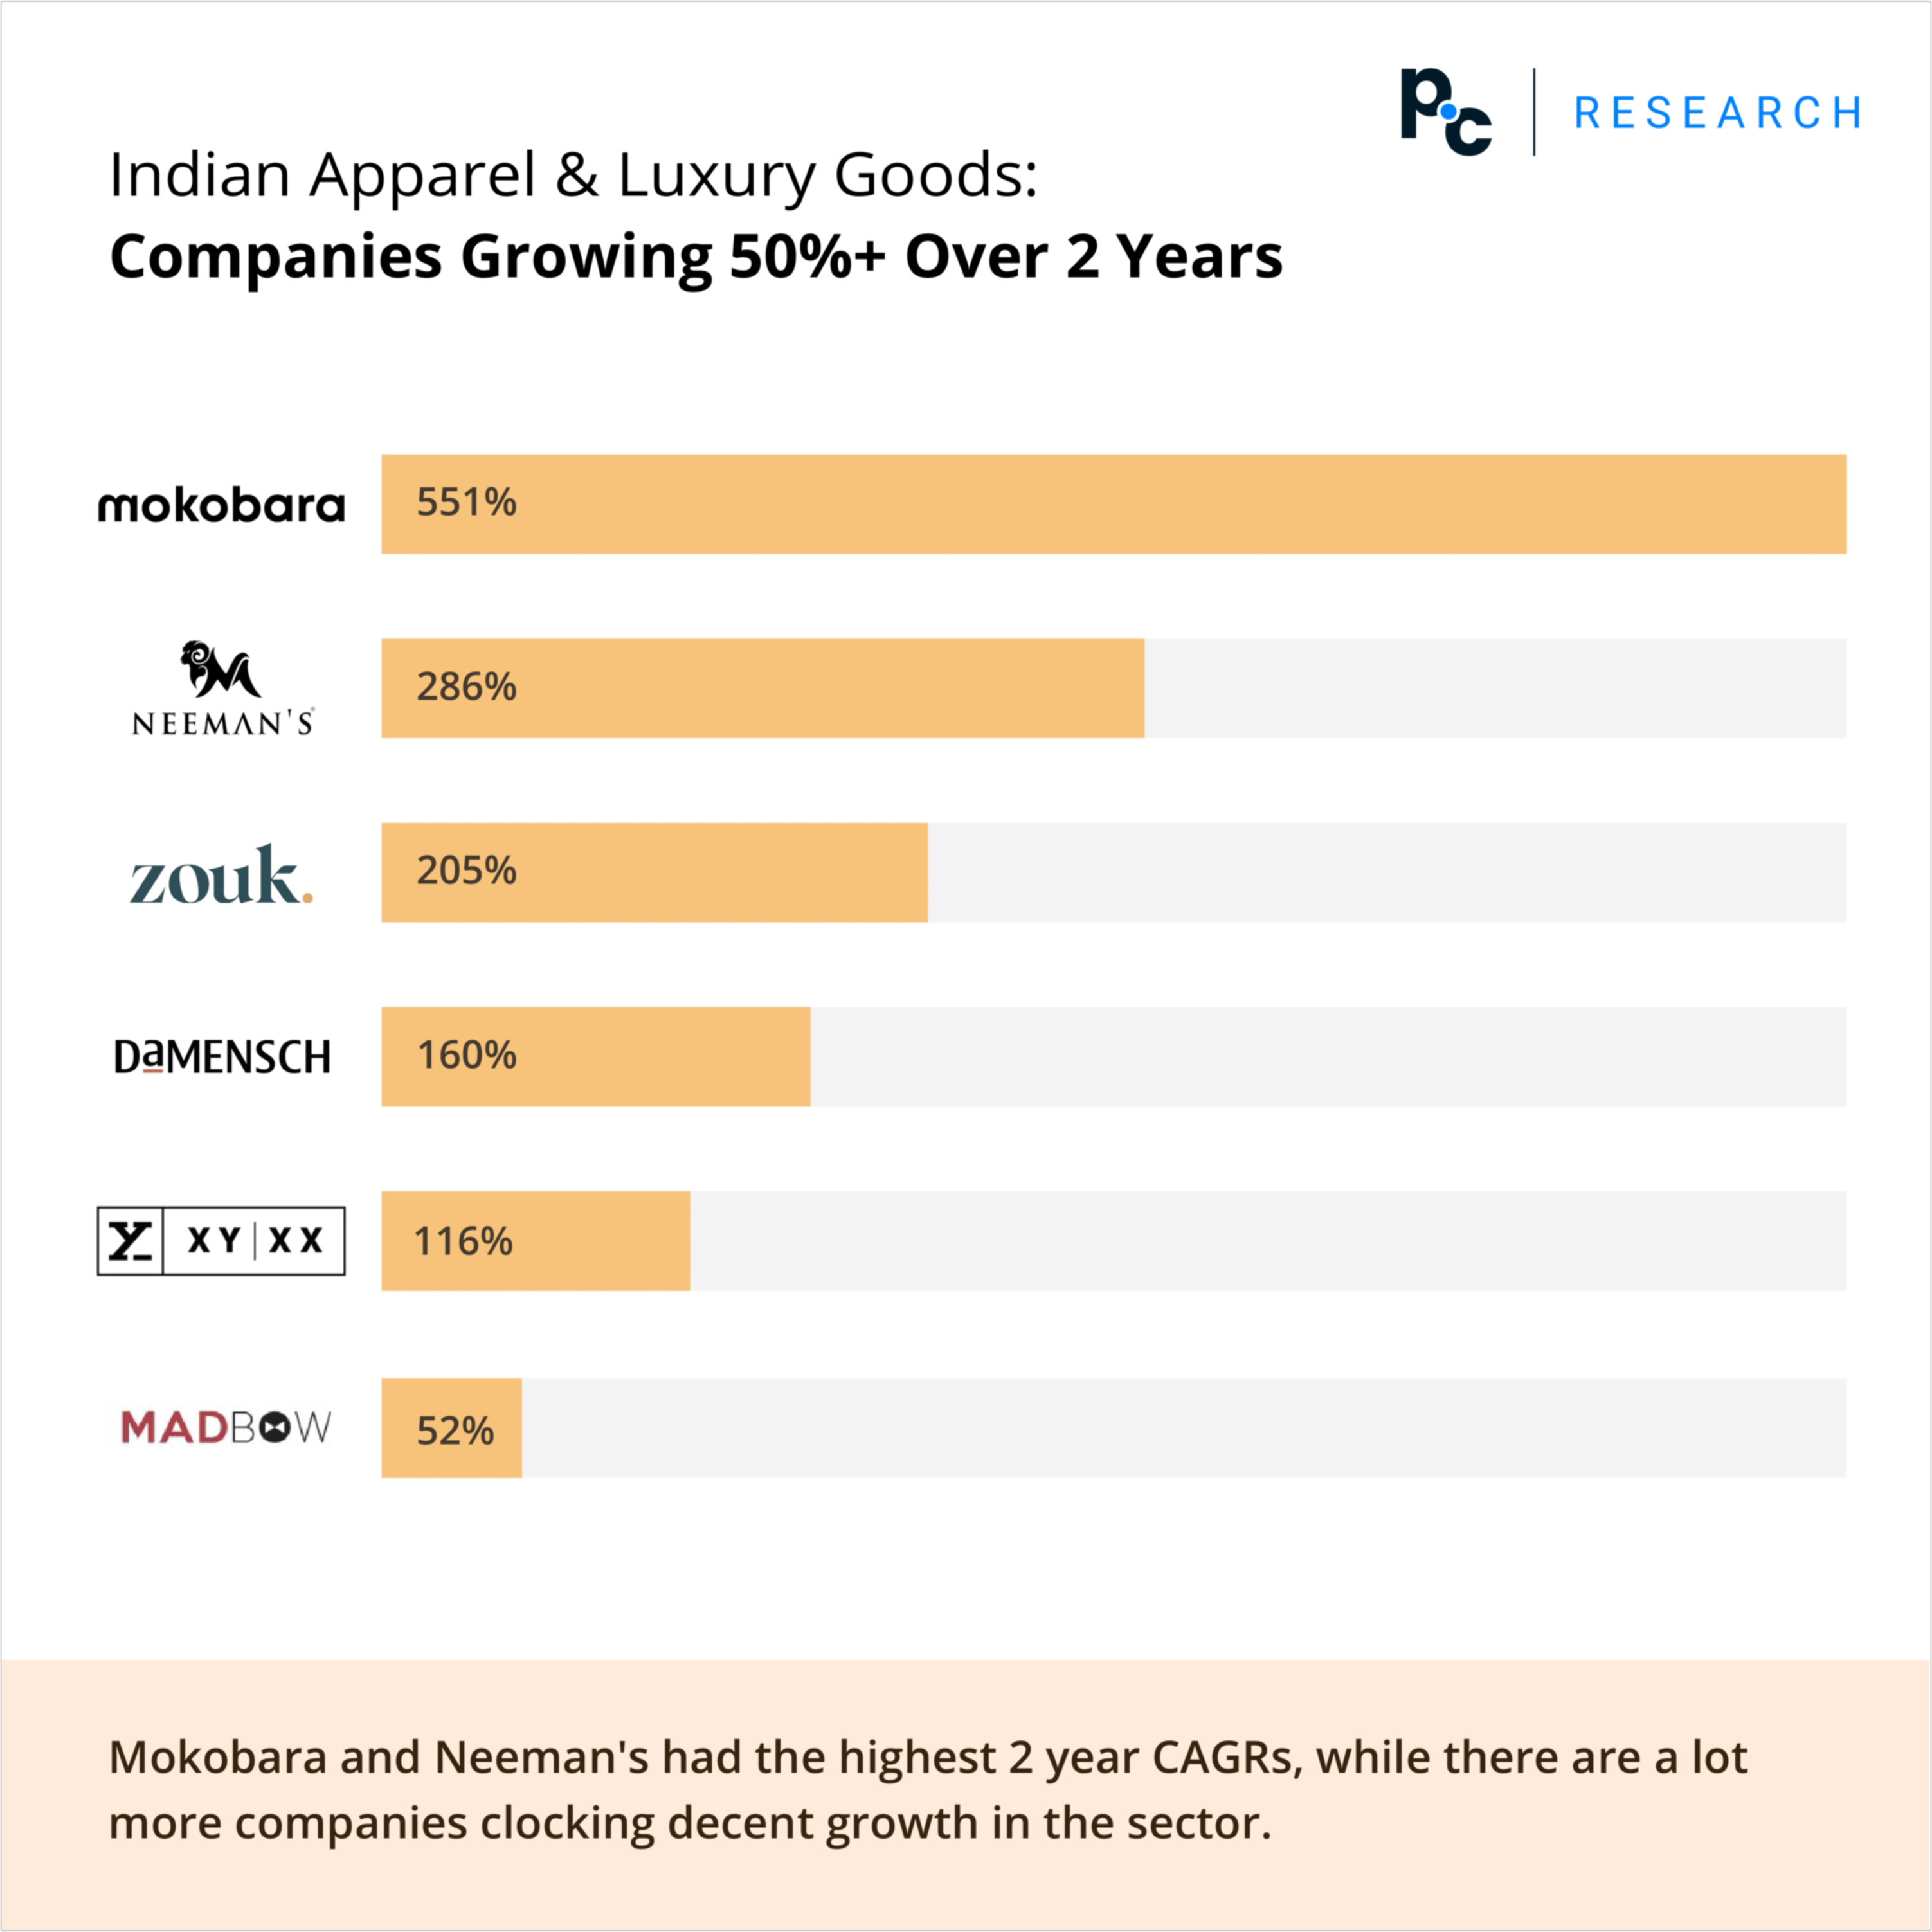 Indian Apparel & Luxury Goods: Companies Growing 50%+ Over 2 Years.

Mokobara and Neeman's had the highest 2 year CAGRs, while there are a lot more companies clocking decent growth in the sector.